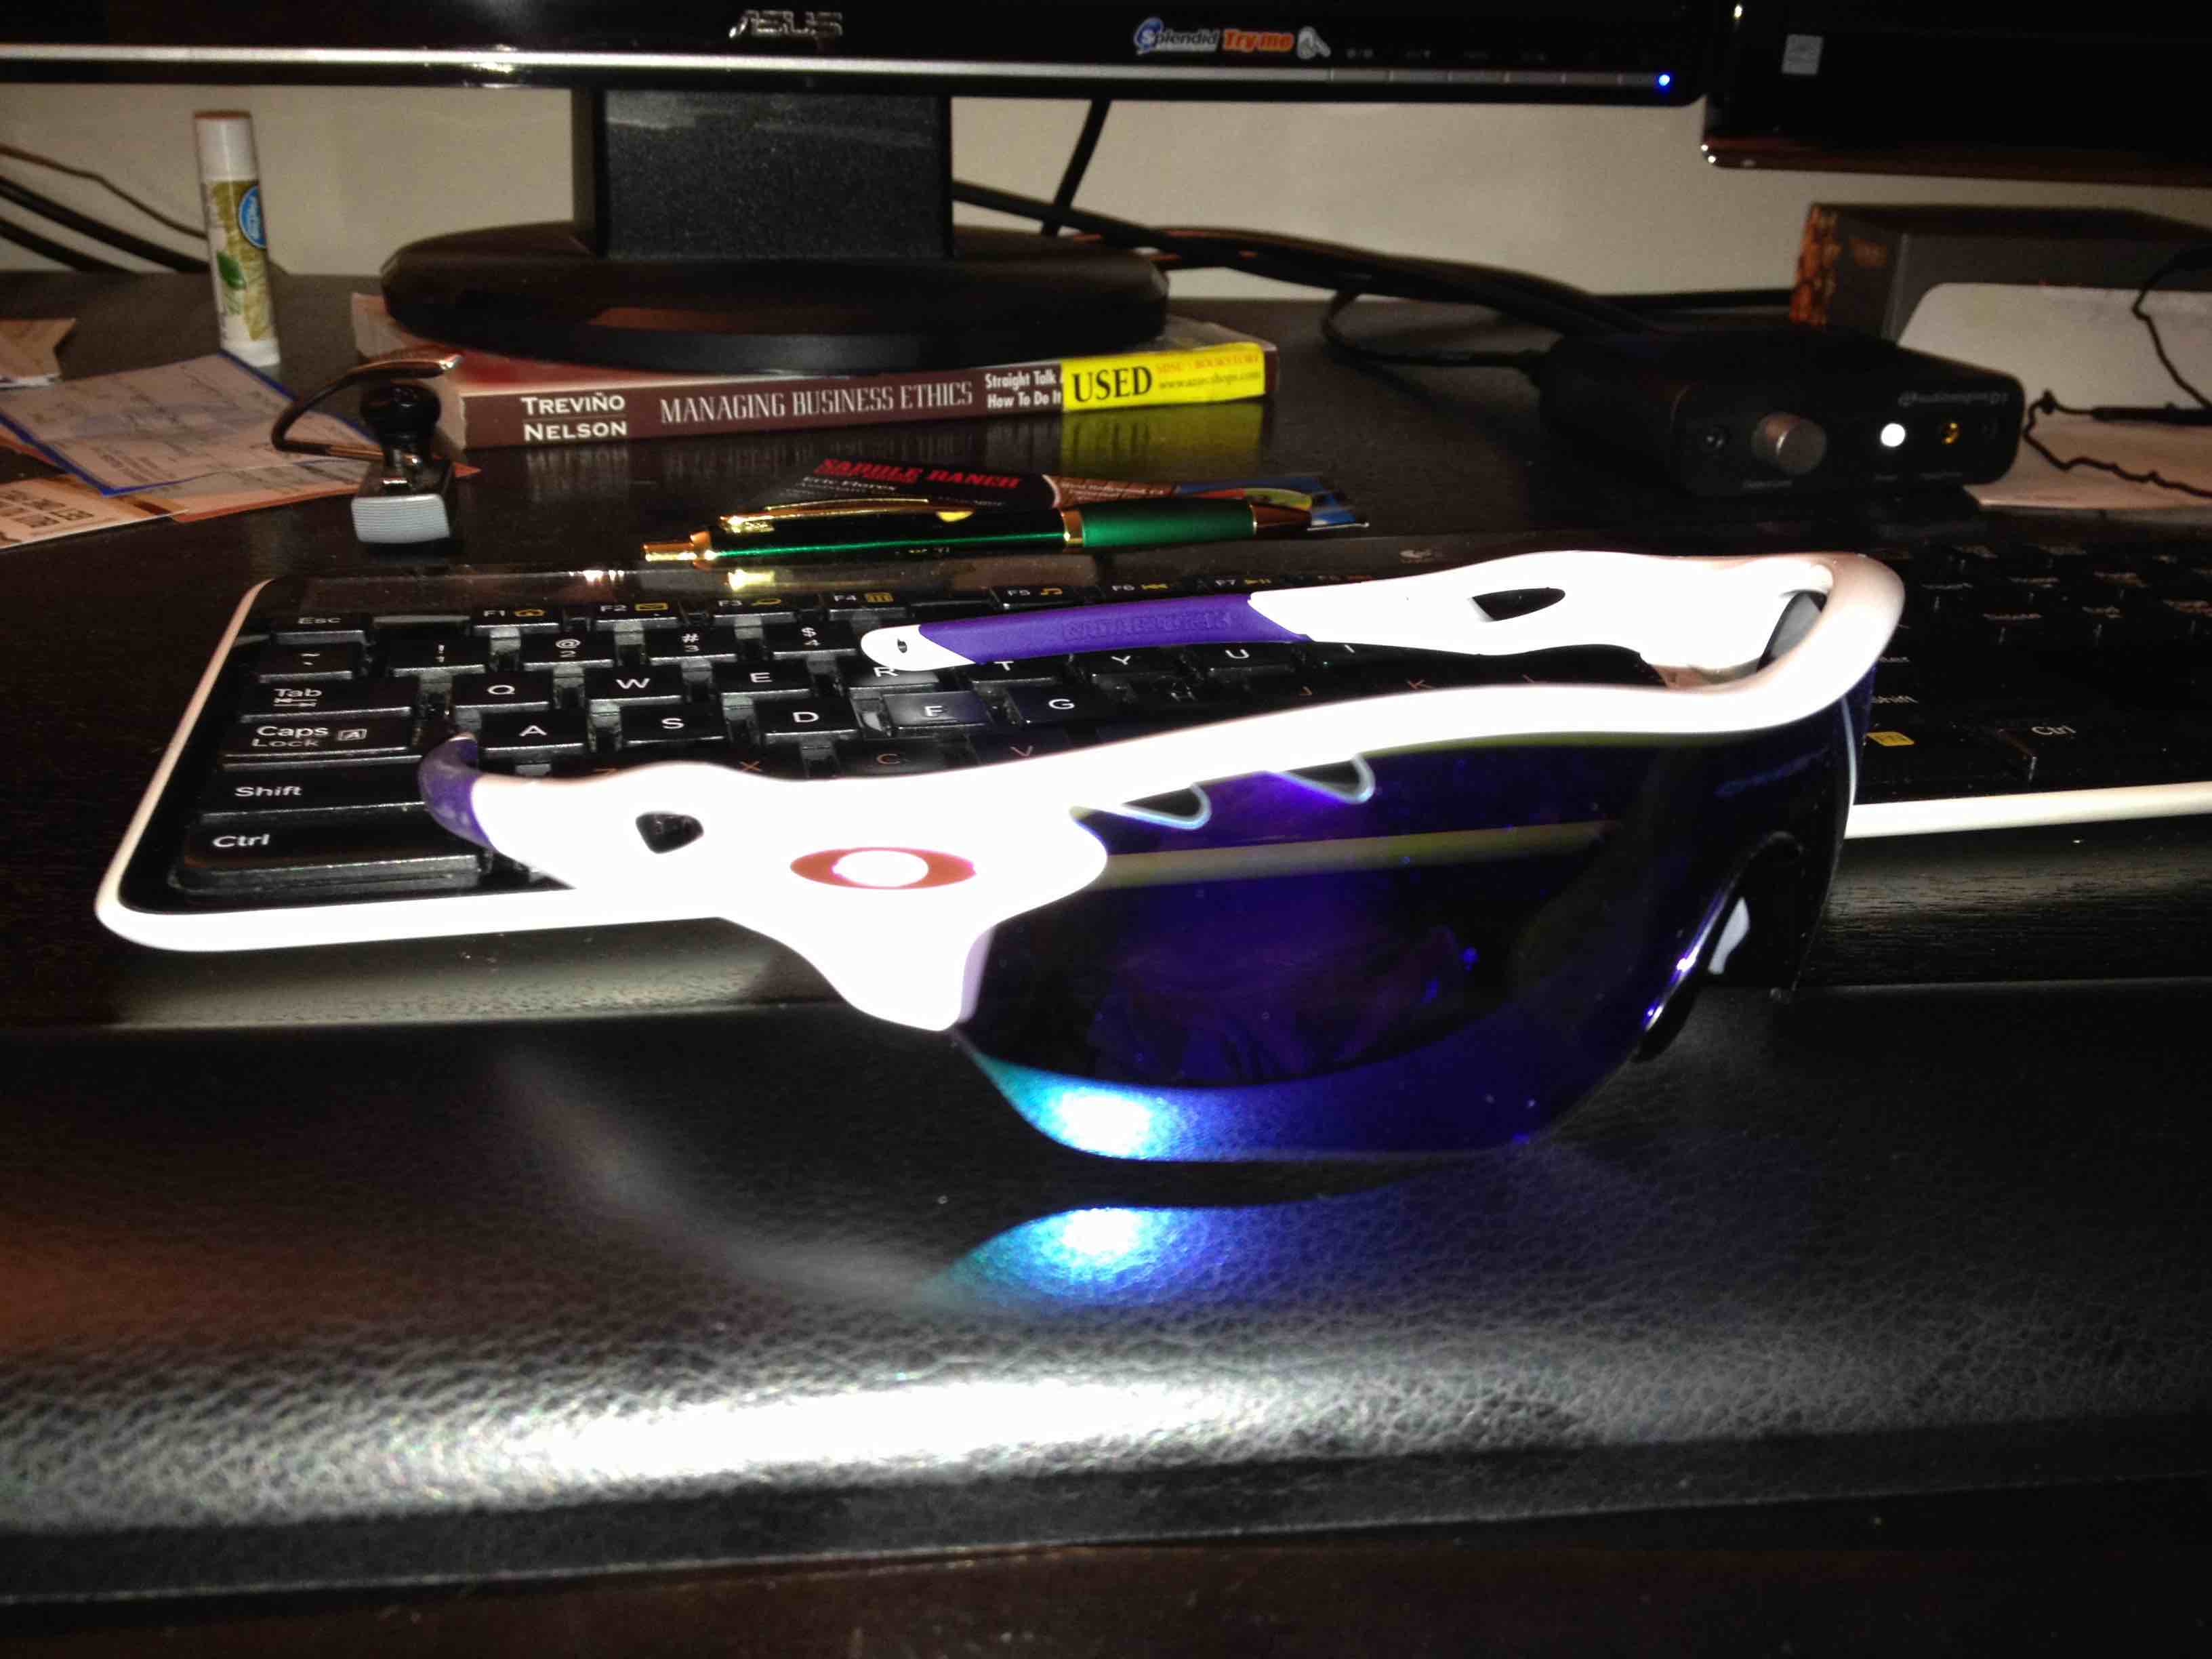 First pair of Oakley sunglasses on desk in front of keyboard